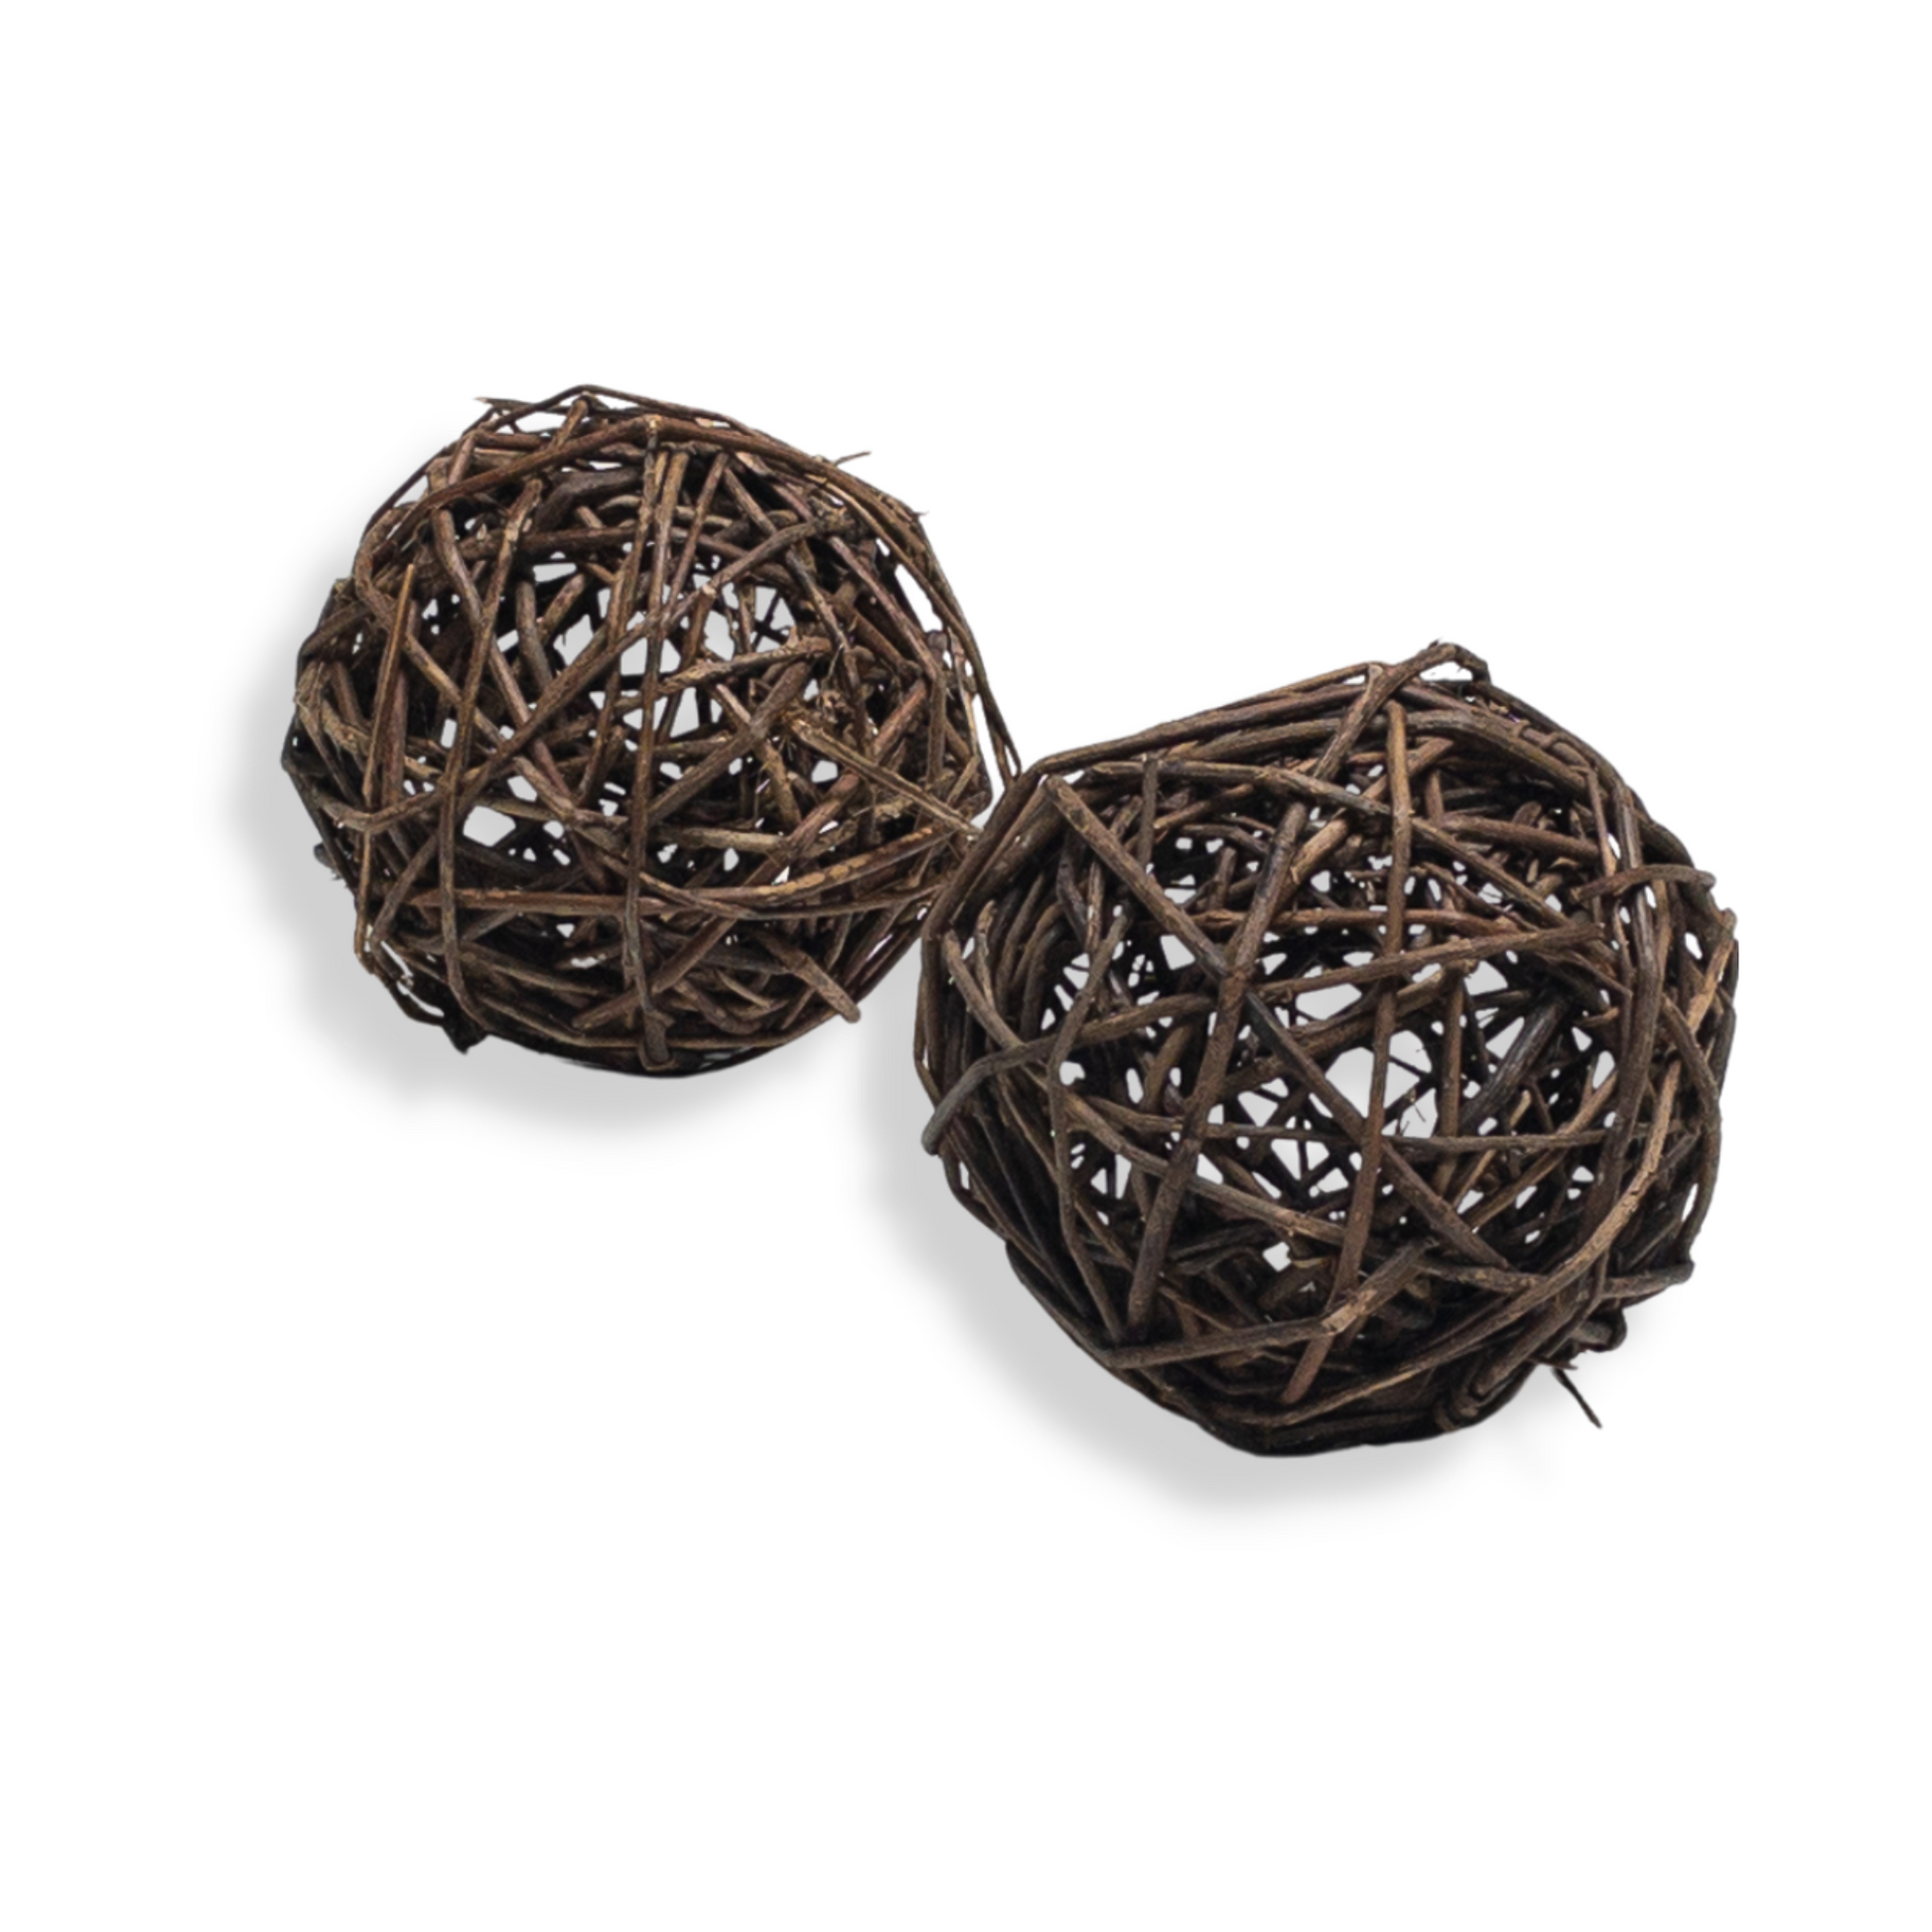 Solid All Natural Willow Chew Balls - Medium